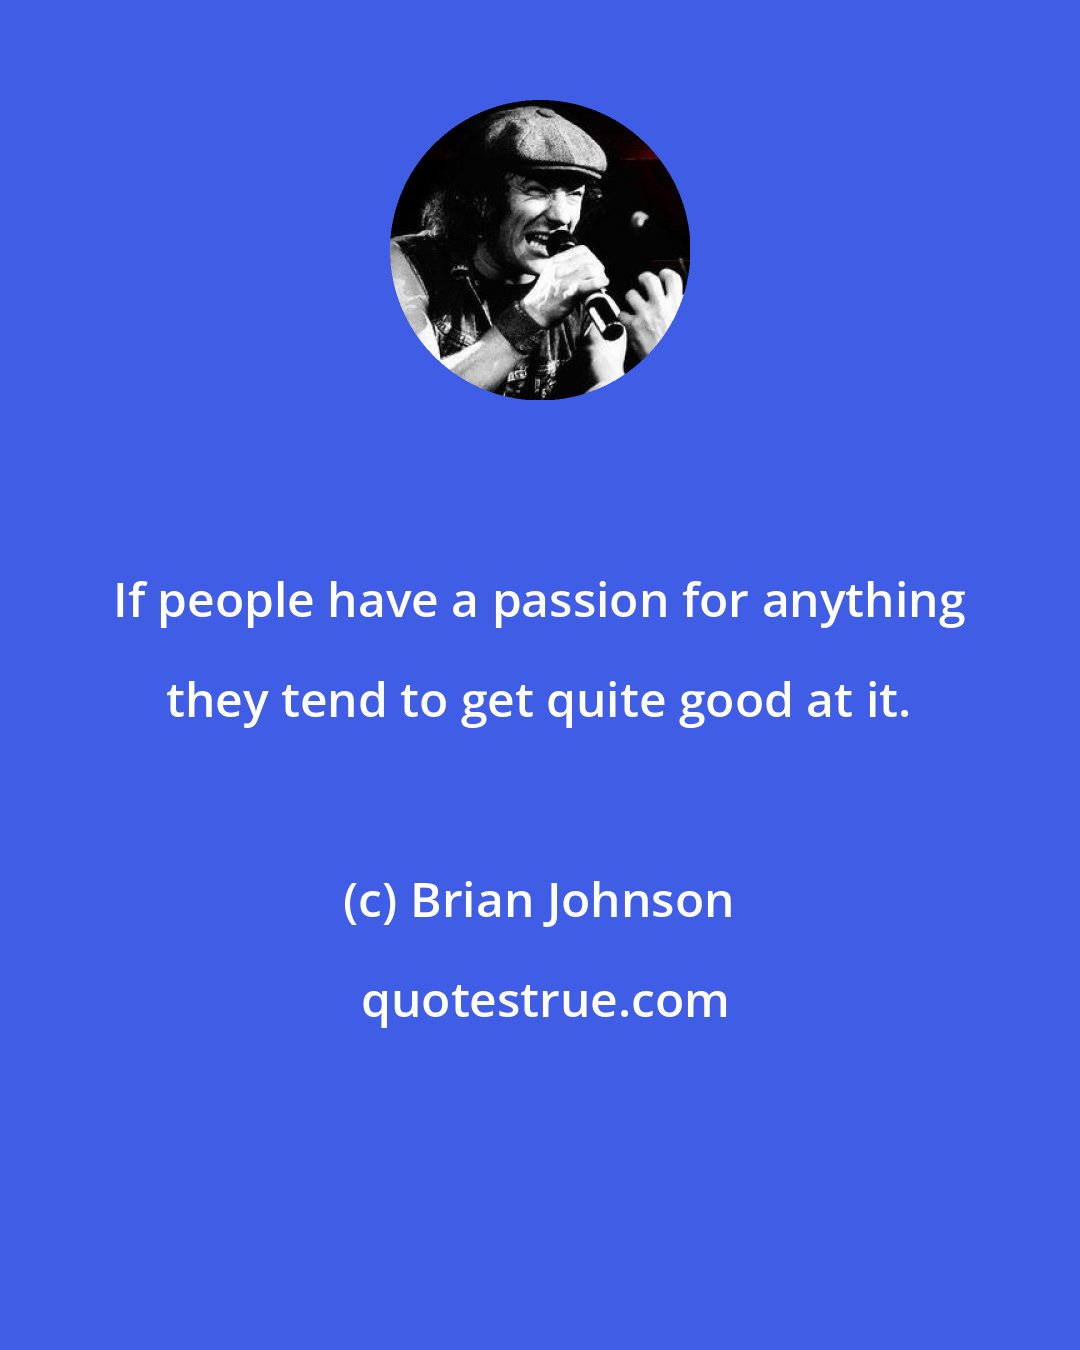 Brian Johnson: If people have a passion for anything they tend to get quite good at it.